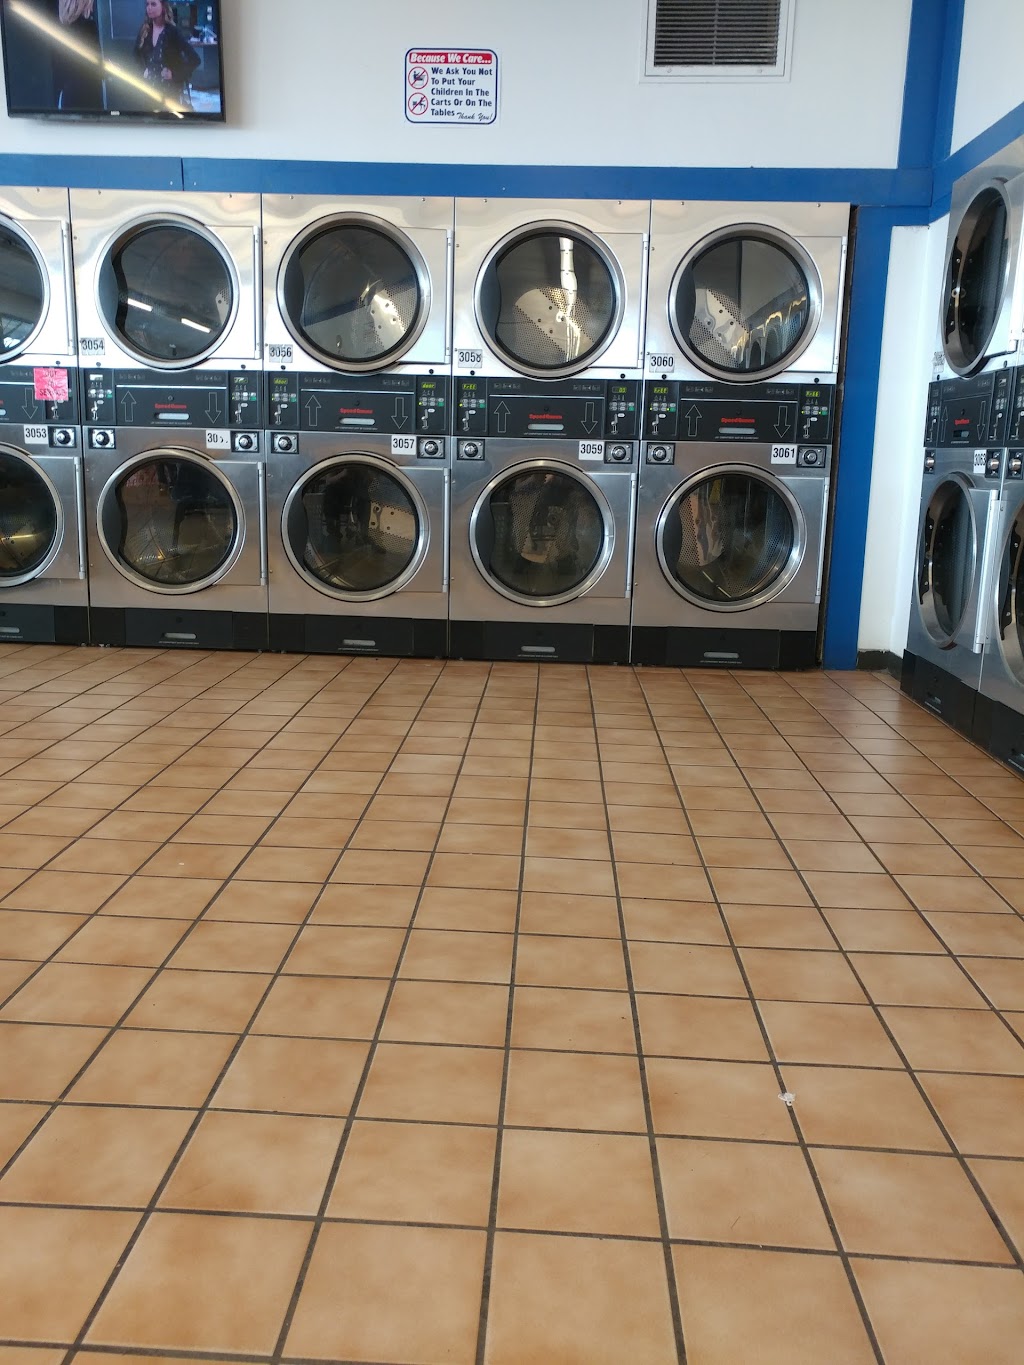 Spincycle Coin Laundry | 9828 Buckeye Rd, Cleveland, OH 44104 | Phone: (216) 231-7740